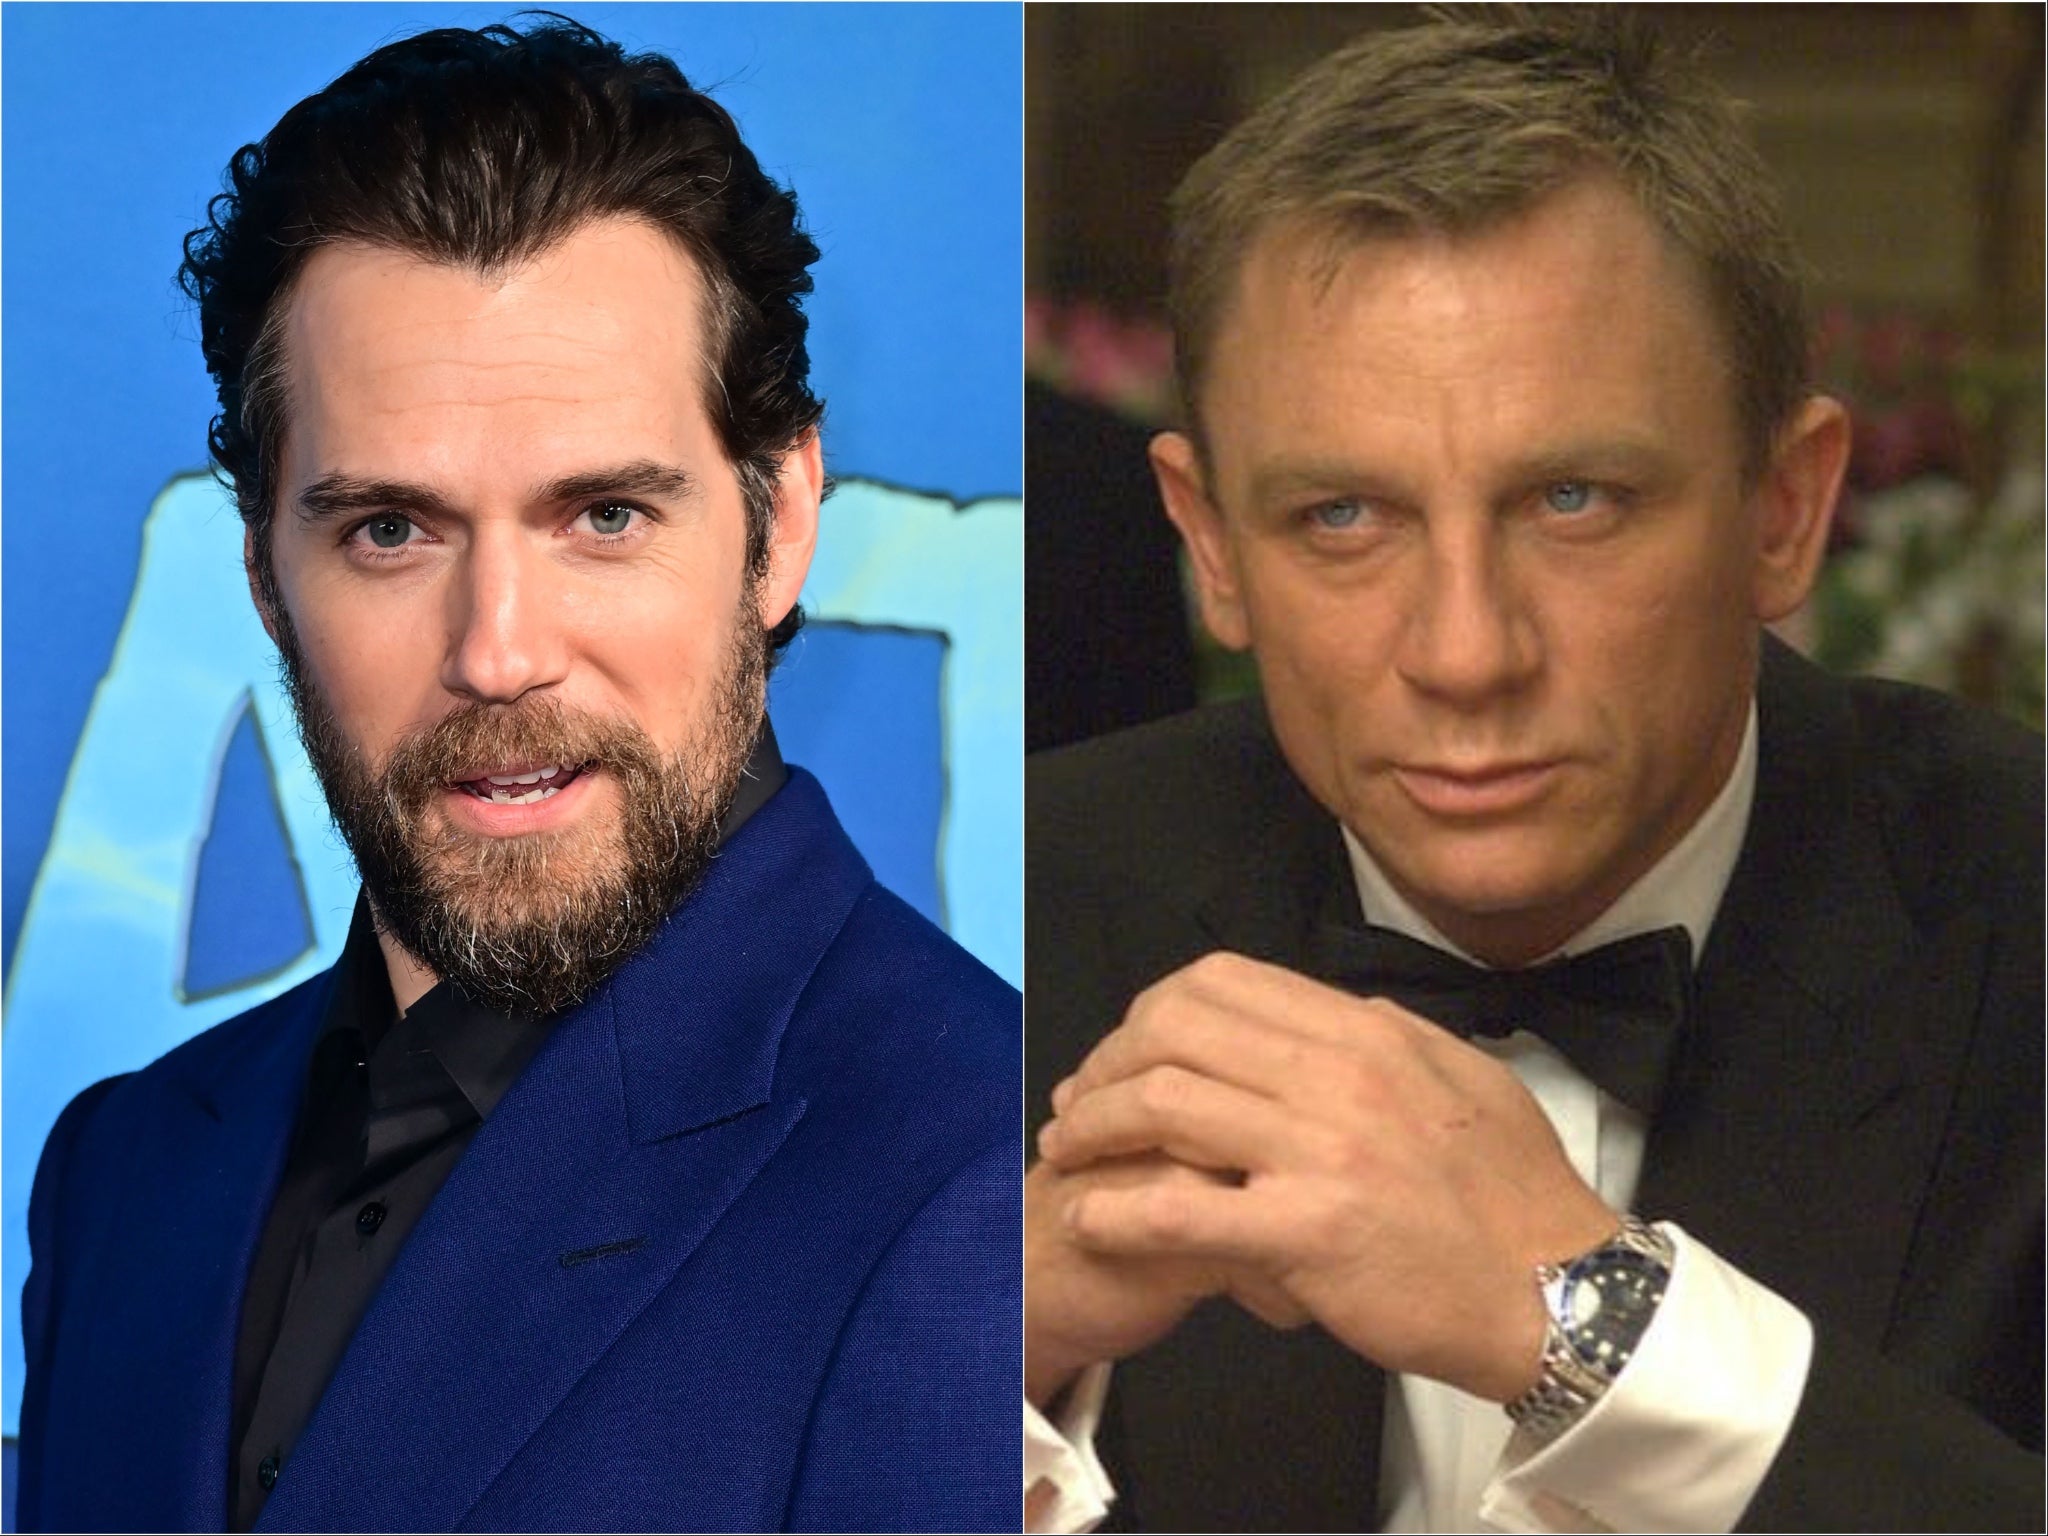 Henry Cavill (left) and Daniel Craig in ‘Casino Royale’